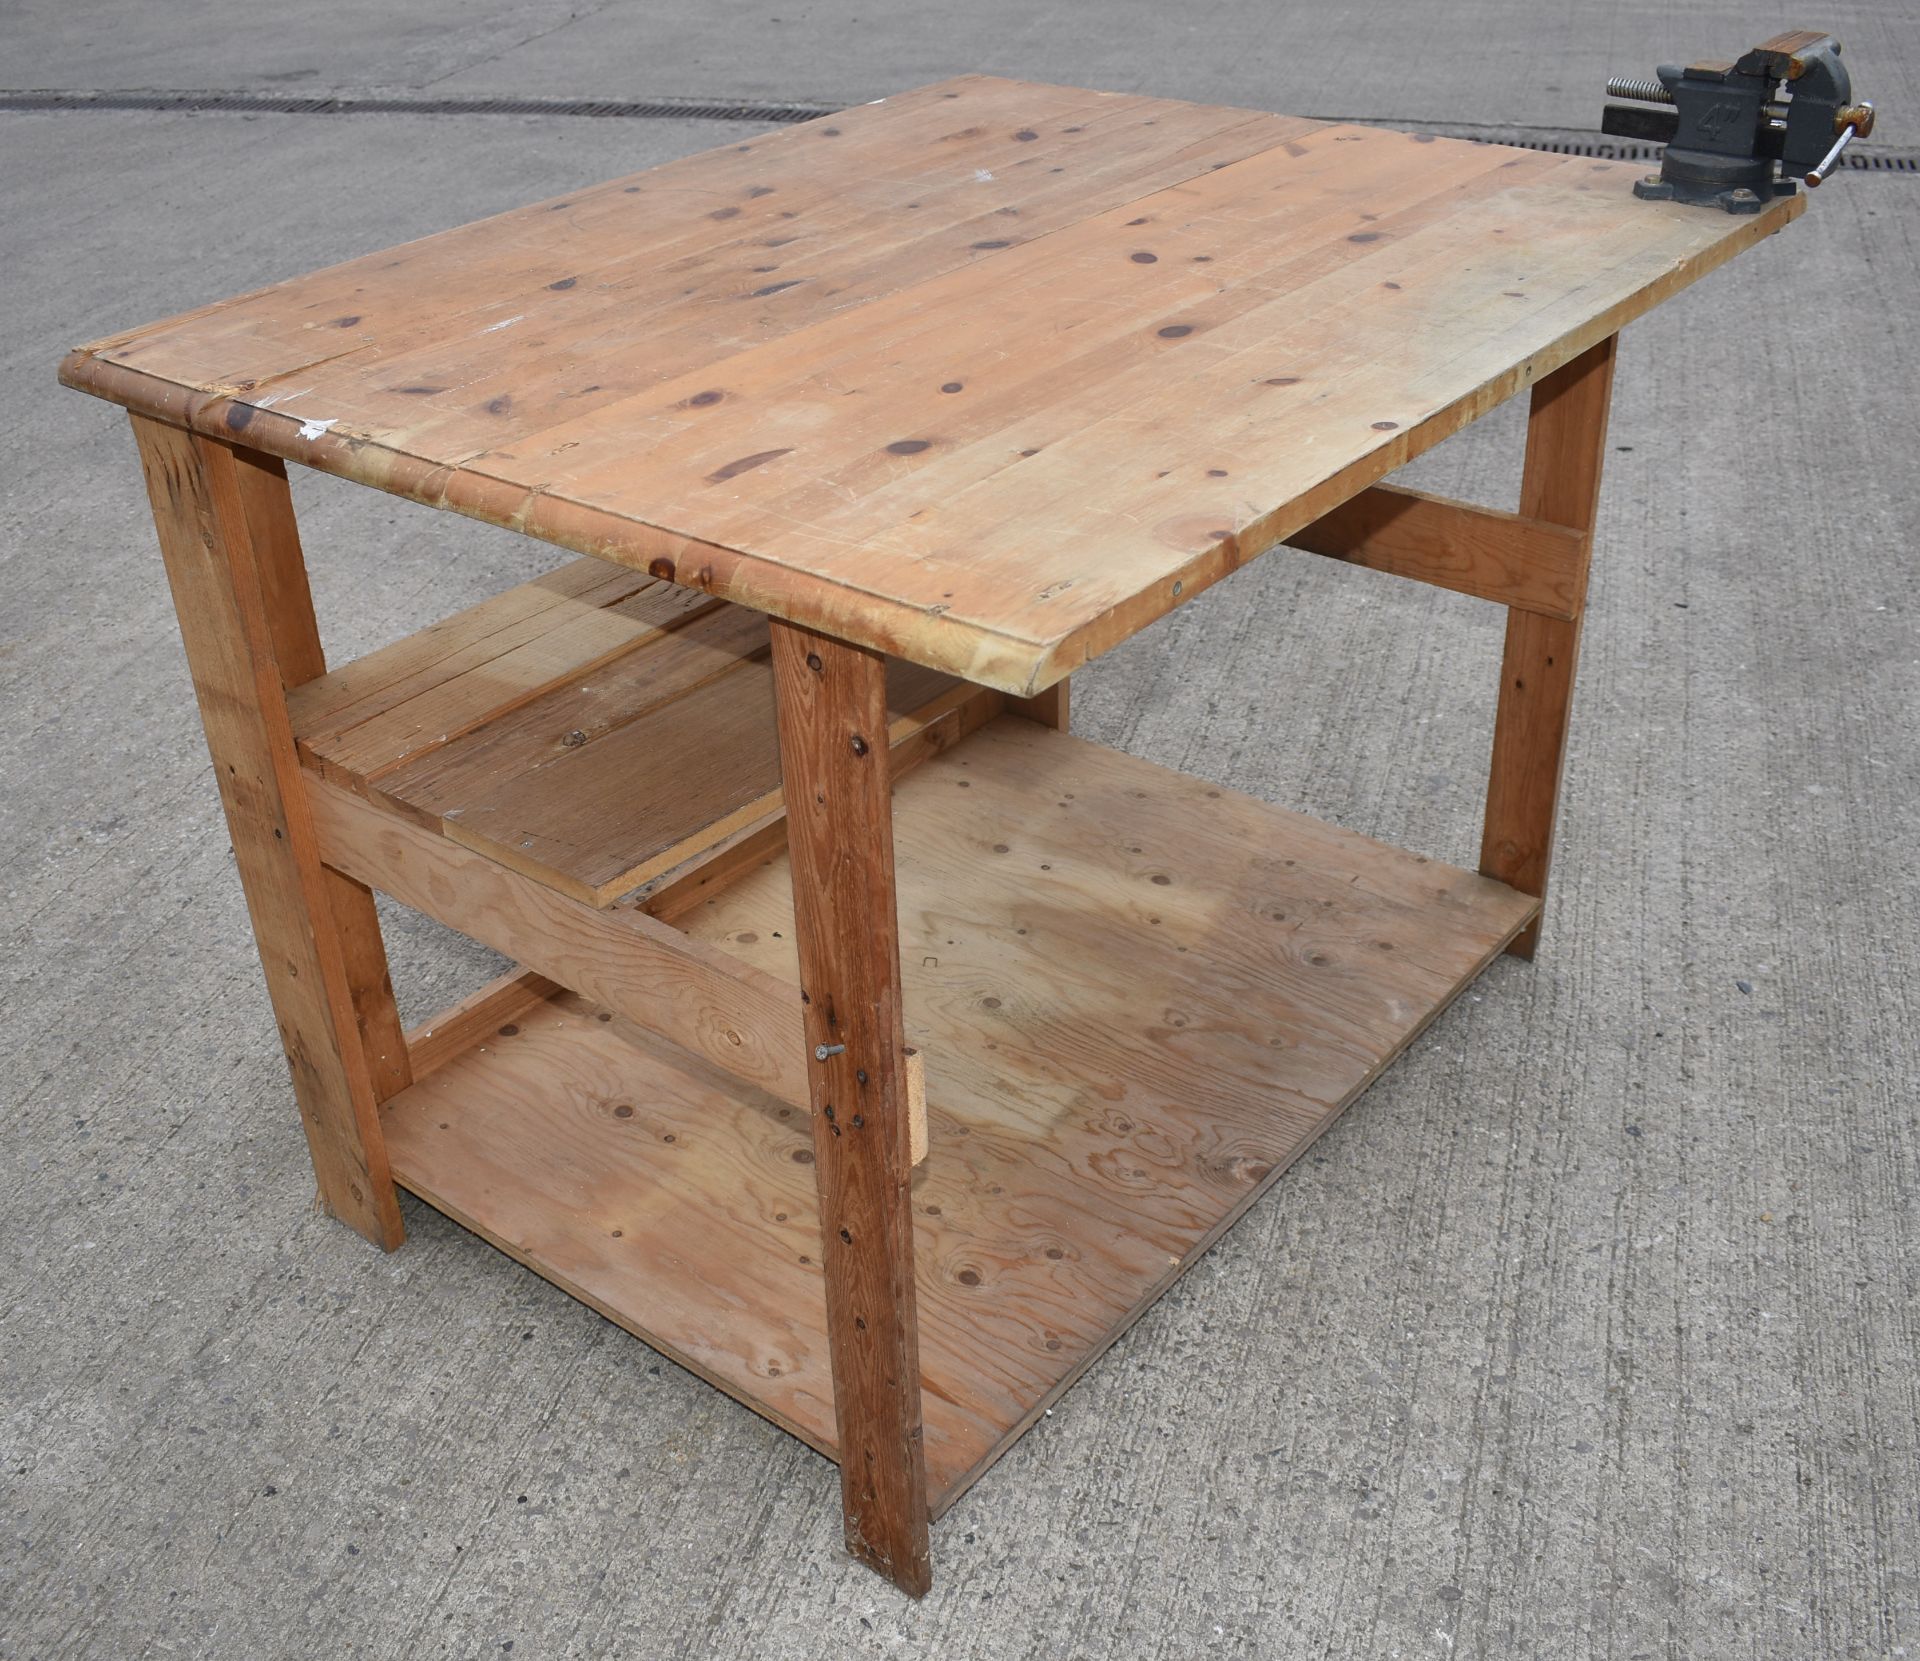 1 x Wooden Workbench With Stanley 4" Vice - 118 (L) x 94.5(D) x 88(H) cms - Ref: K234 - CL905 - Loca - Image 9 of 10